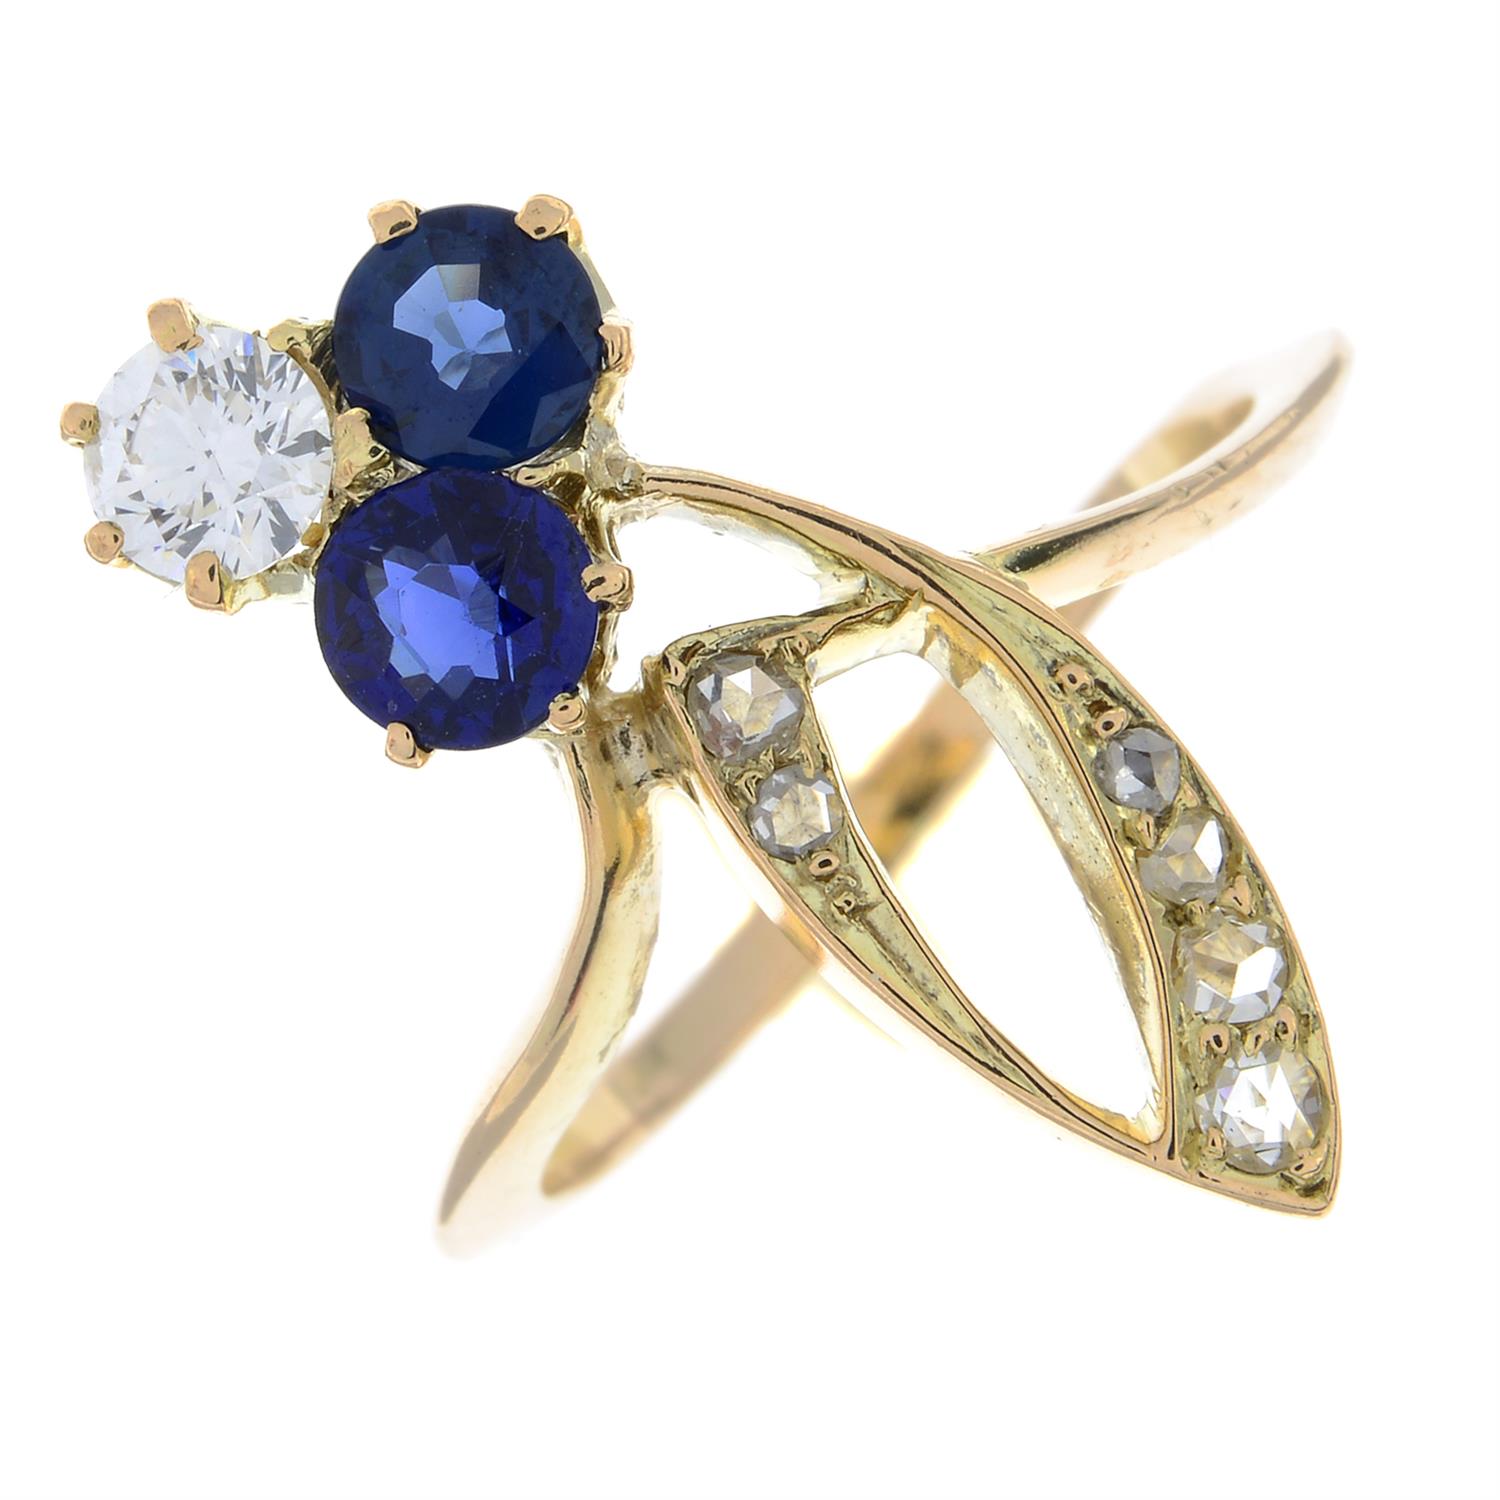 Russian Art Nouveau gold diamond and sapphire ring - Image 2 of 5